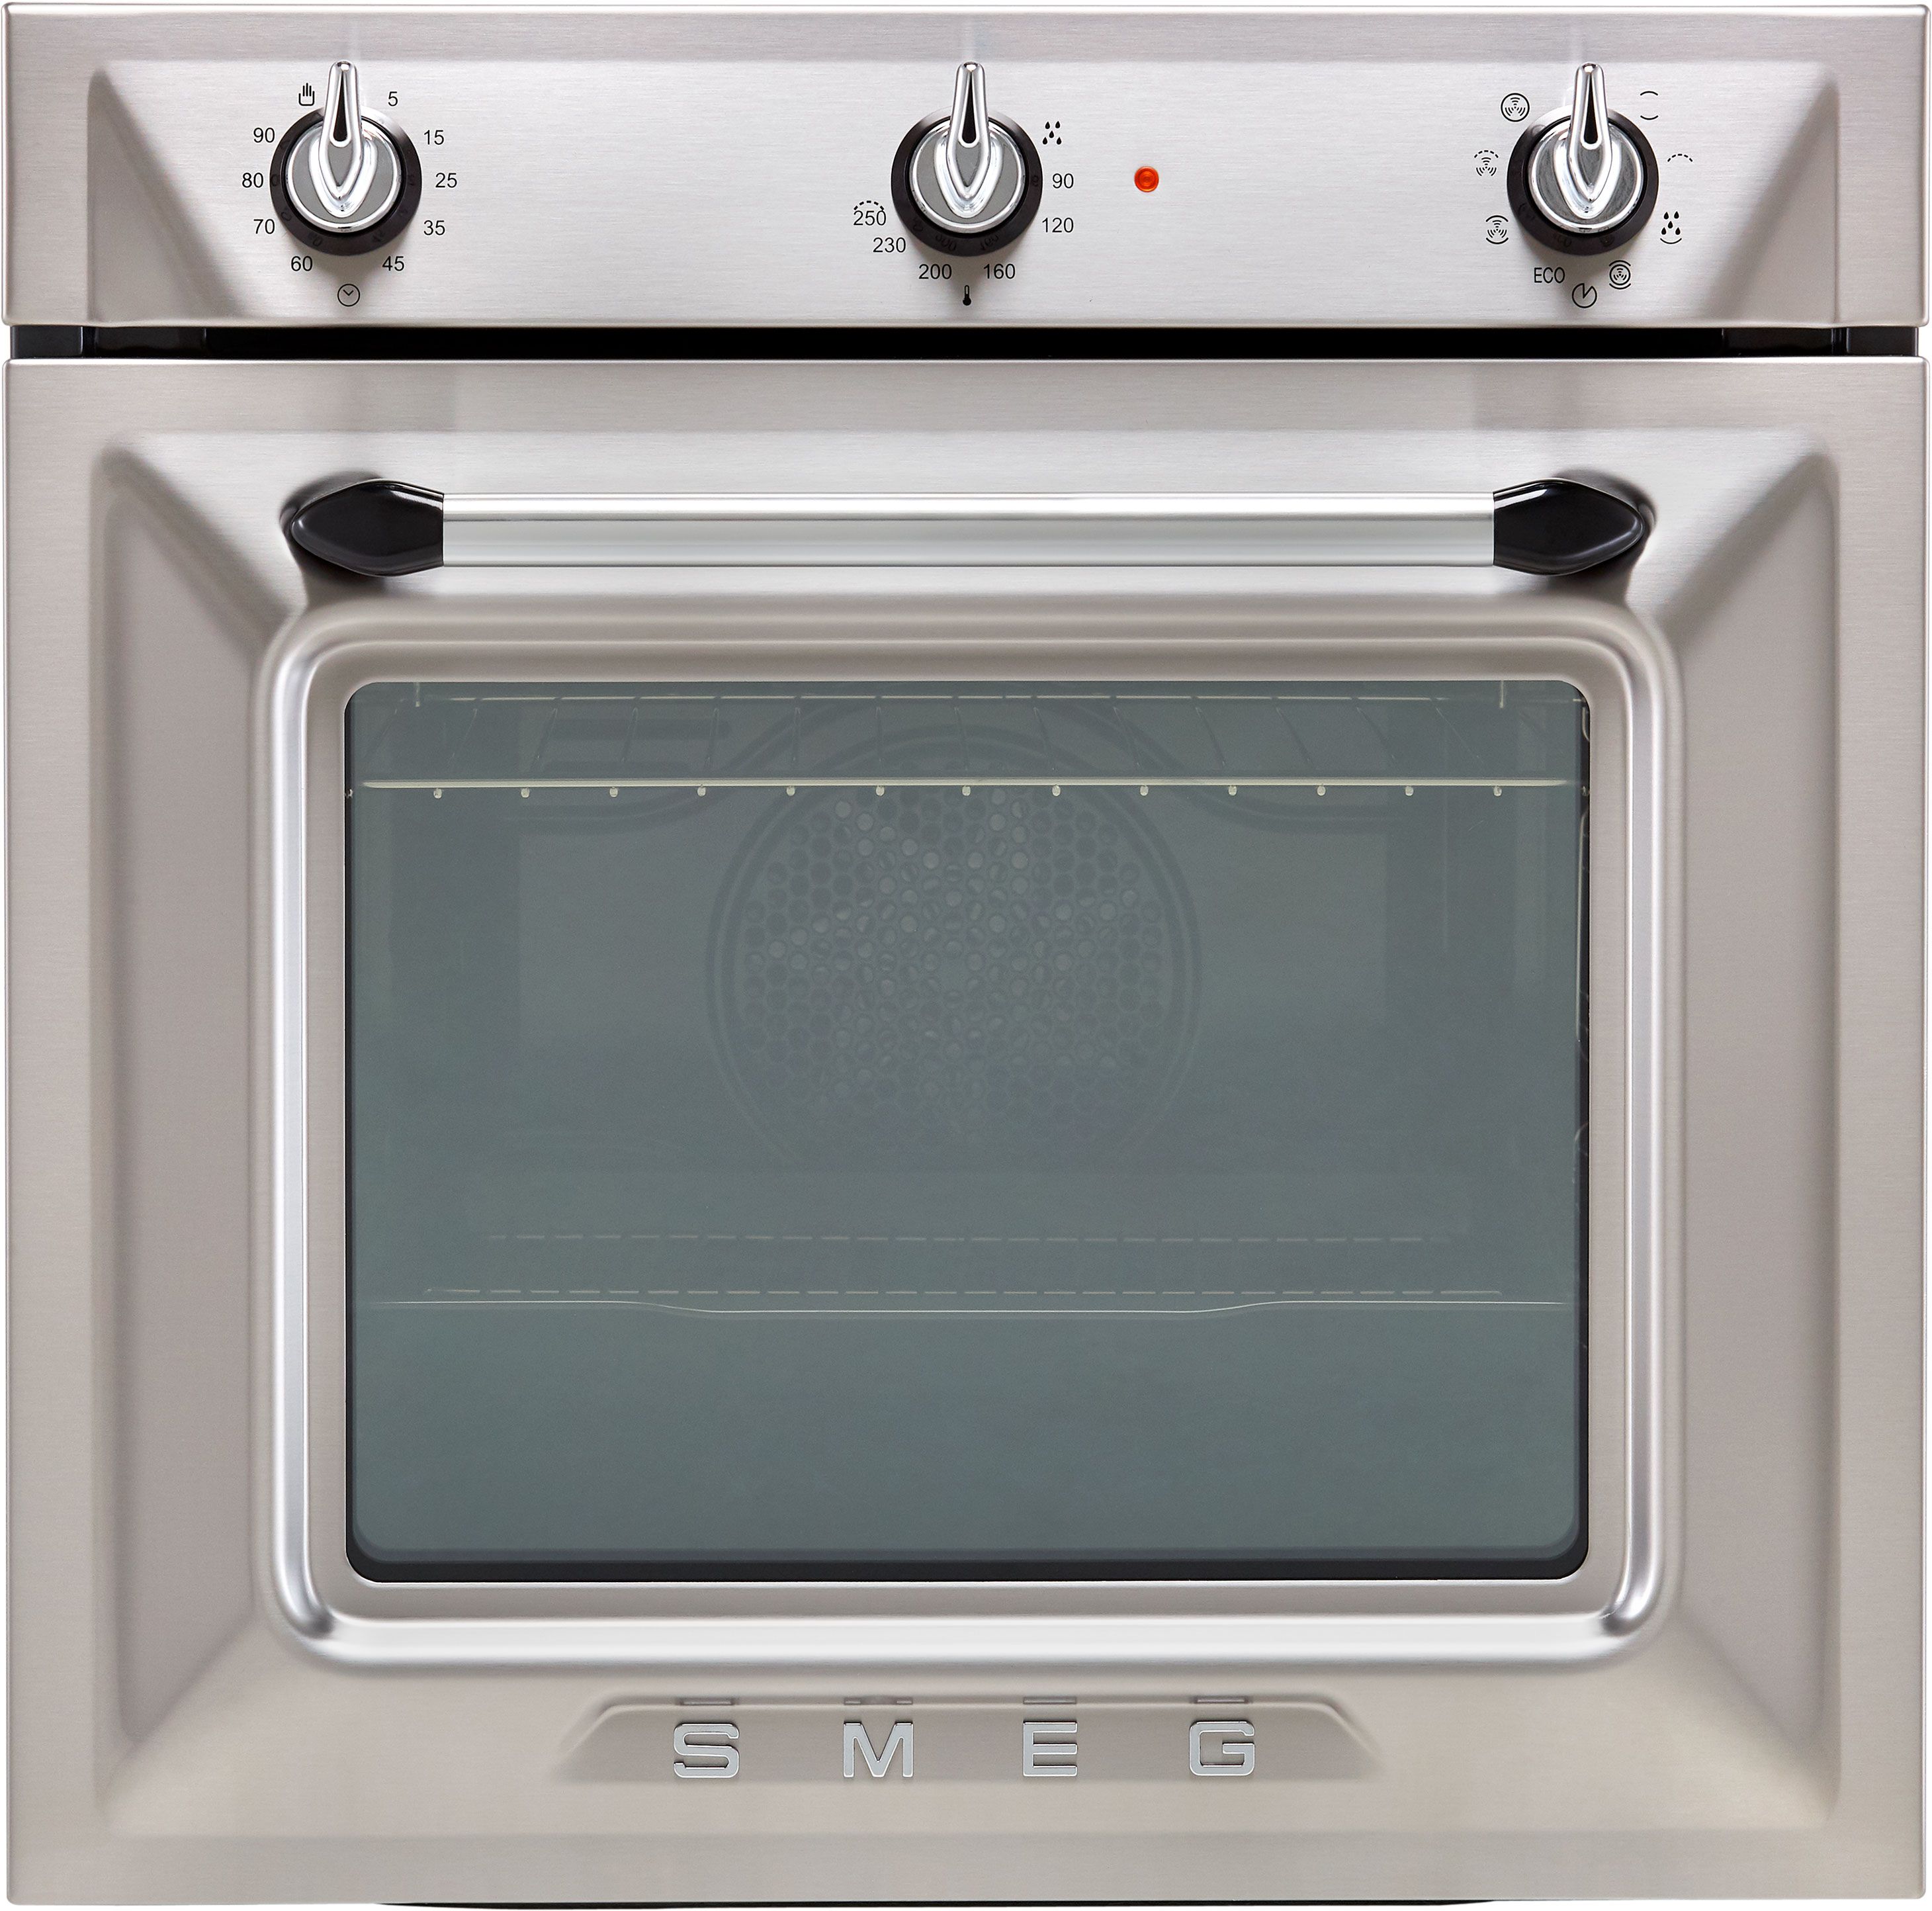 Smeg Victoria SF6905X1 Built In Electric Single Oven - Stainless Steel - A Rated, Stainless Steel